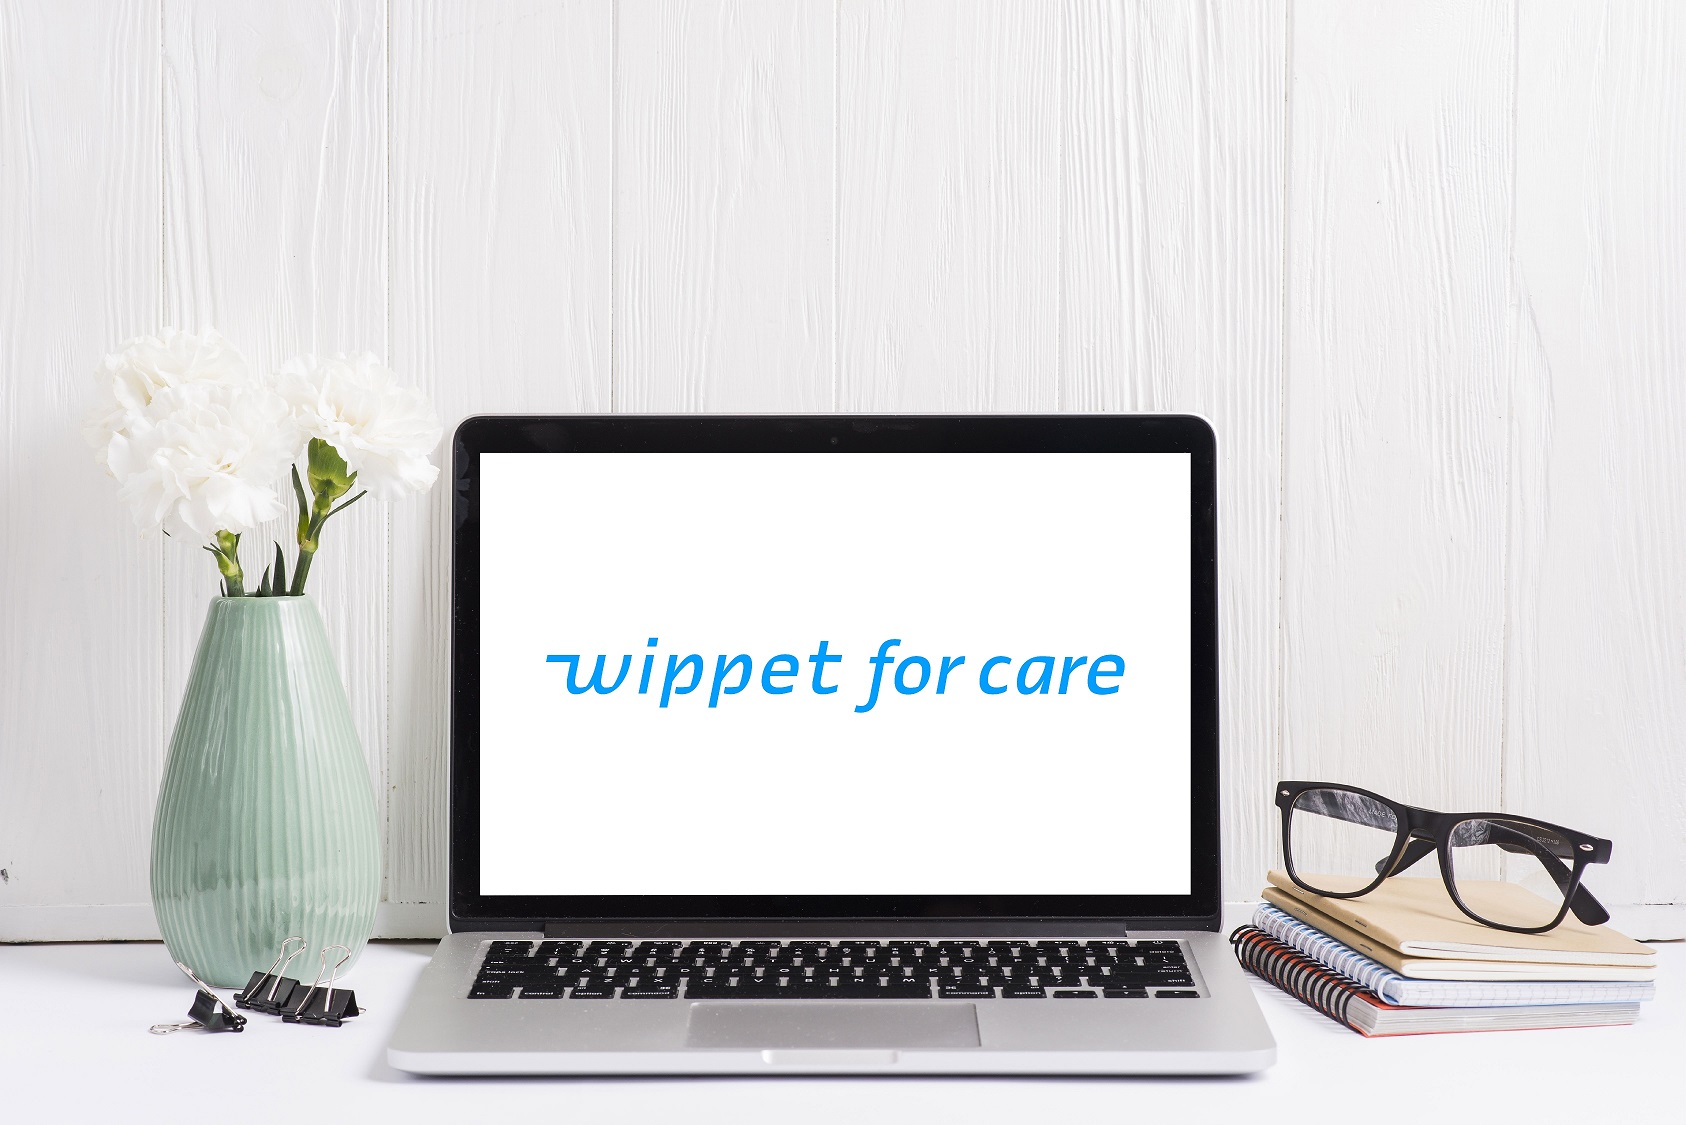 Wippet For Care